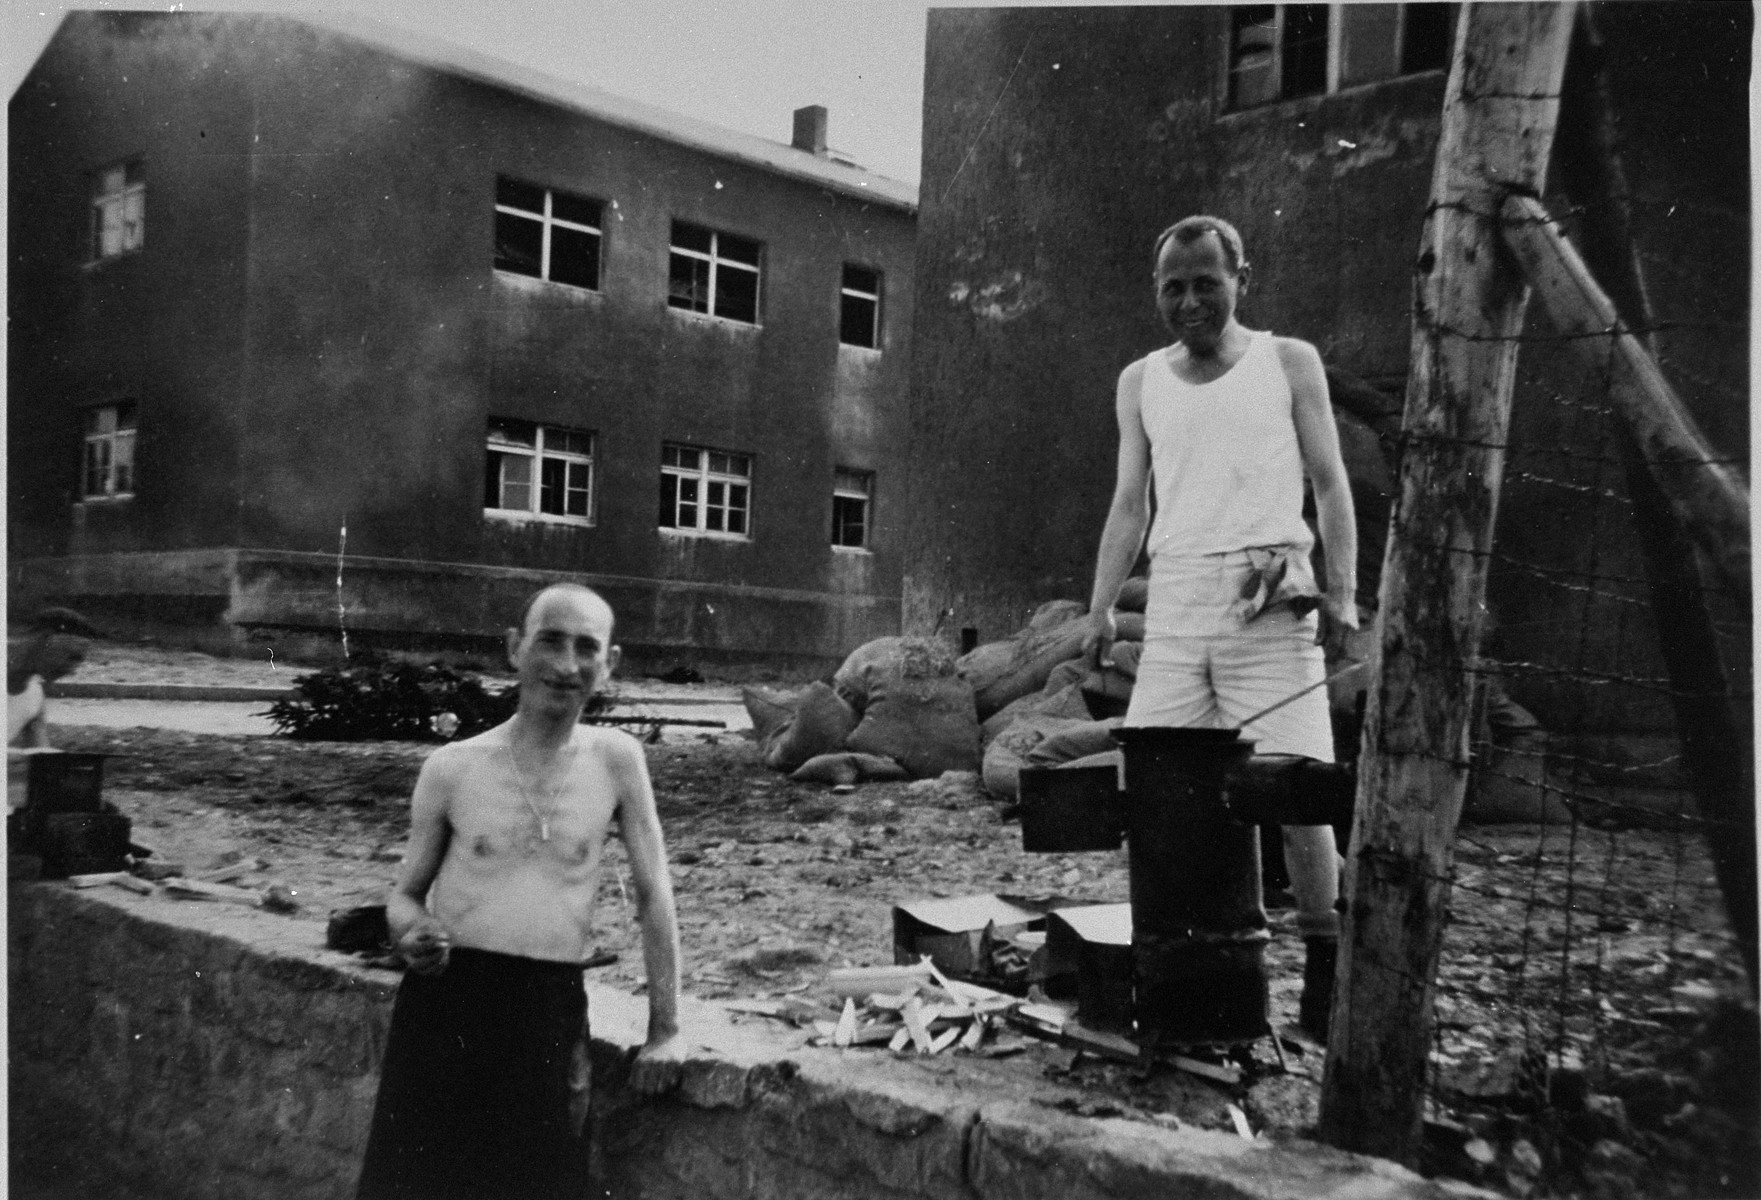 Two Buchnewald survivors in Buchenwald prepare a meal after liberation.  

The inscription on the back of the photograph reads, "Buchenwald Prison Camp Inmates.  5/7/45.  Man on left from Antwerp weighed 90 kilos (180 lbs) on entry to camp.  When picture was taken weighed 40 kilos (80 lbs.).